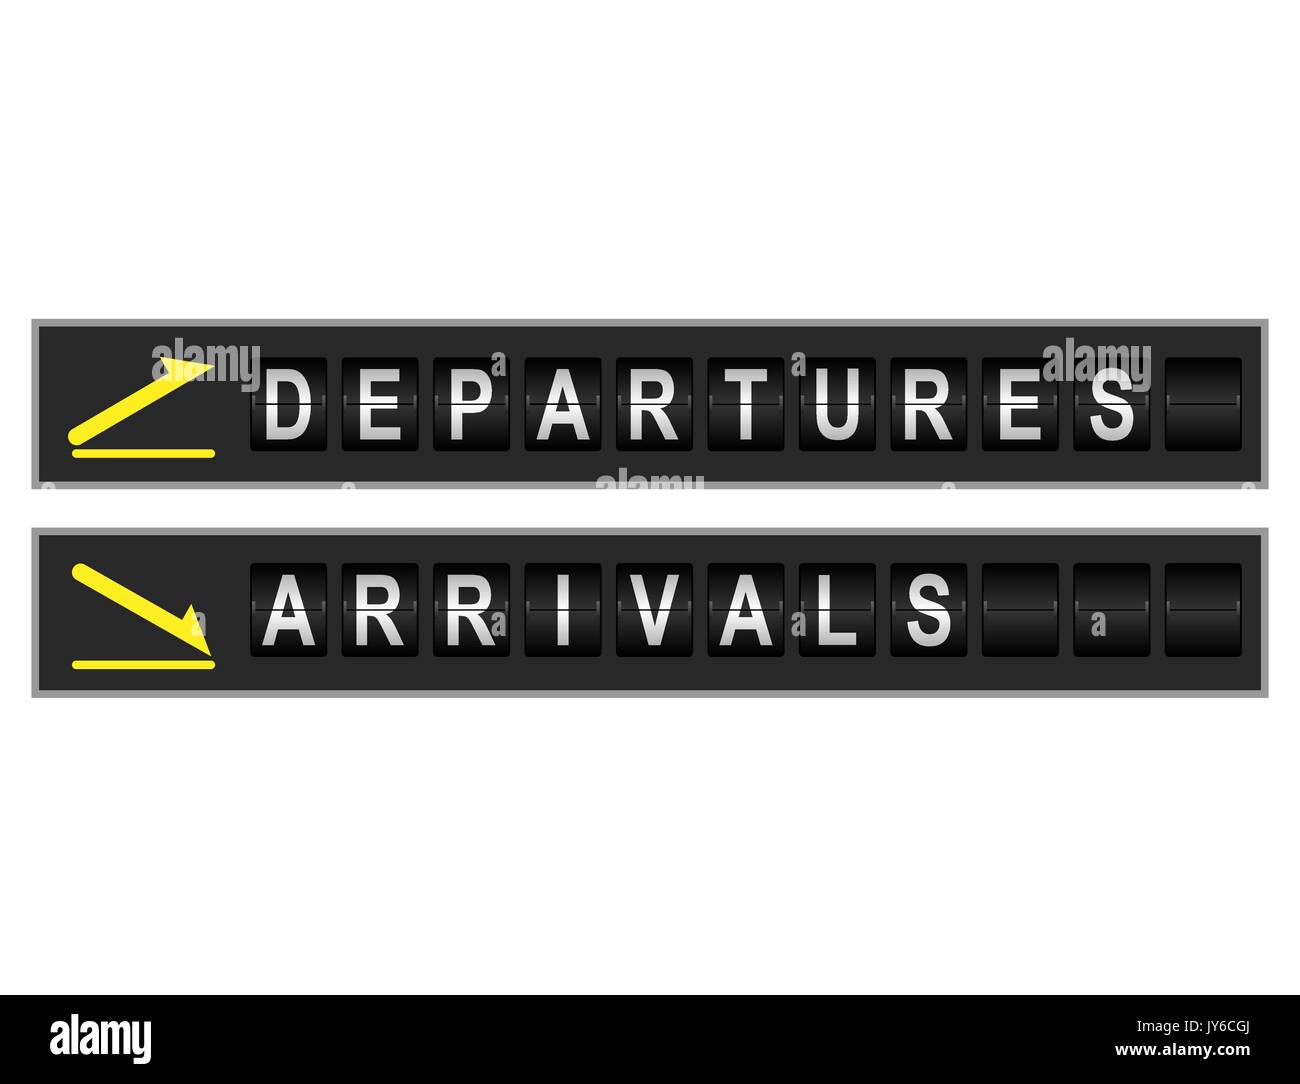 Departures and arrivals mechanical display font signs Stock Vector